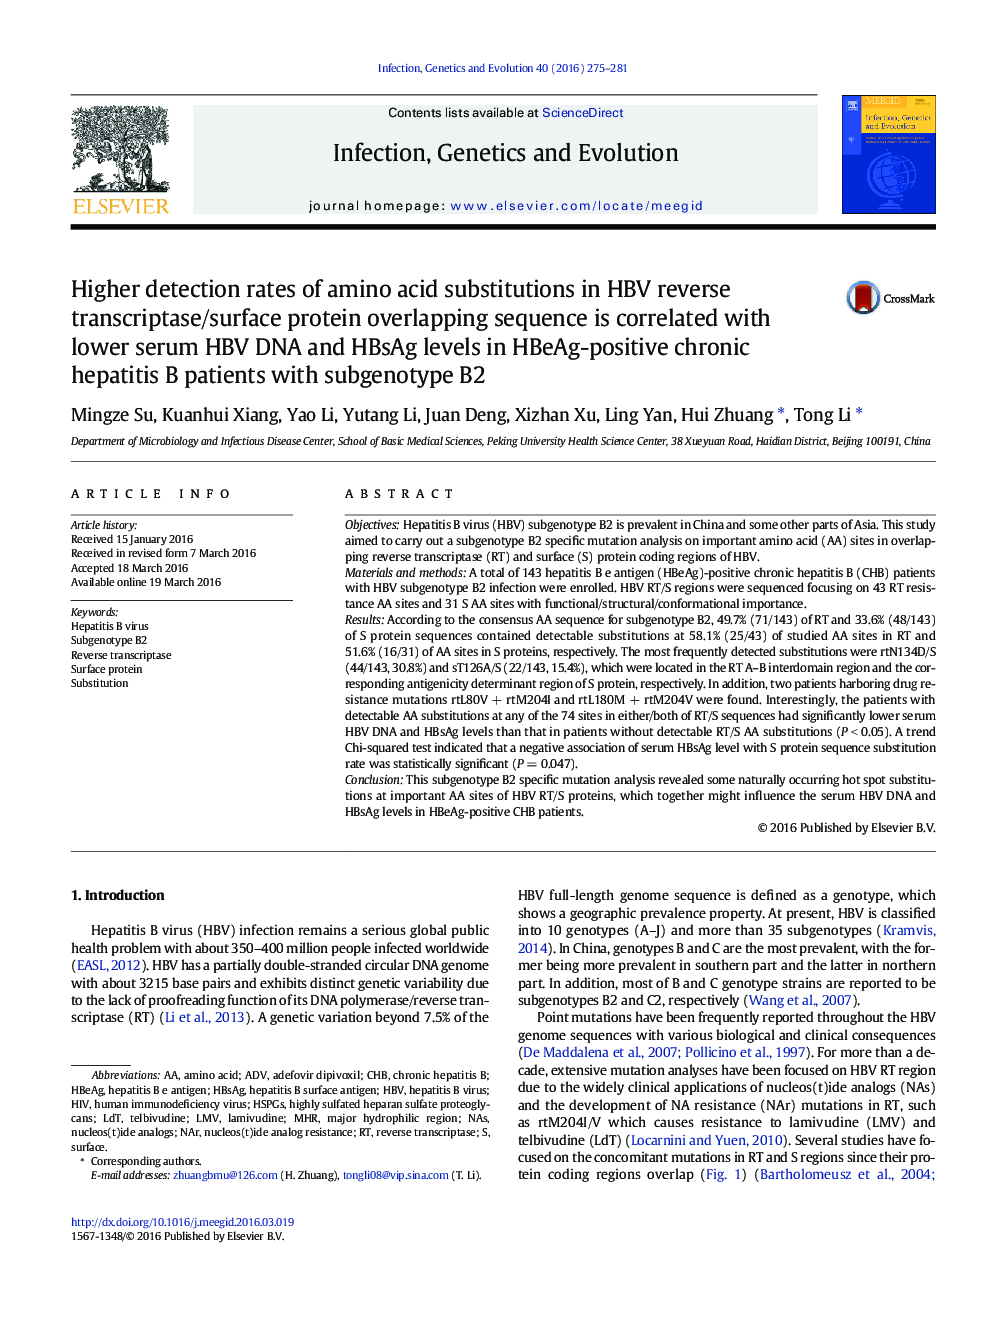 Higher detection rates of amino acid substitutions in HBV reverse transcriptase/surface protein overlapping sequence is correlated with lower serum HBV DNA and HBsAg levels in HBeAg-positive chronic hepatitis B patients with subgenotype B2